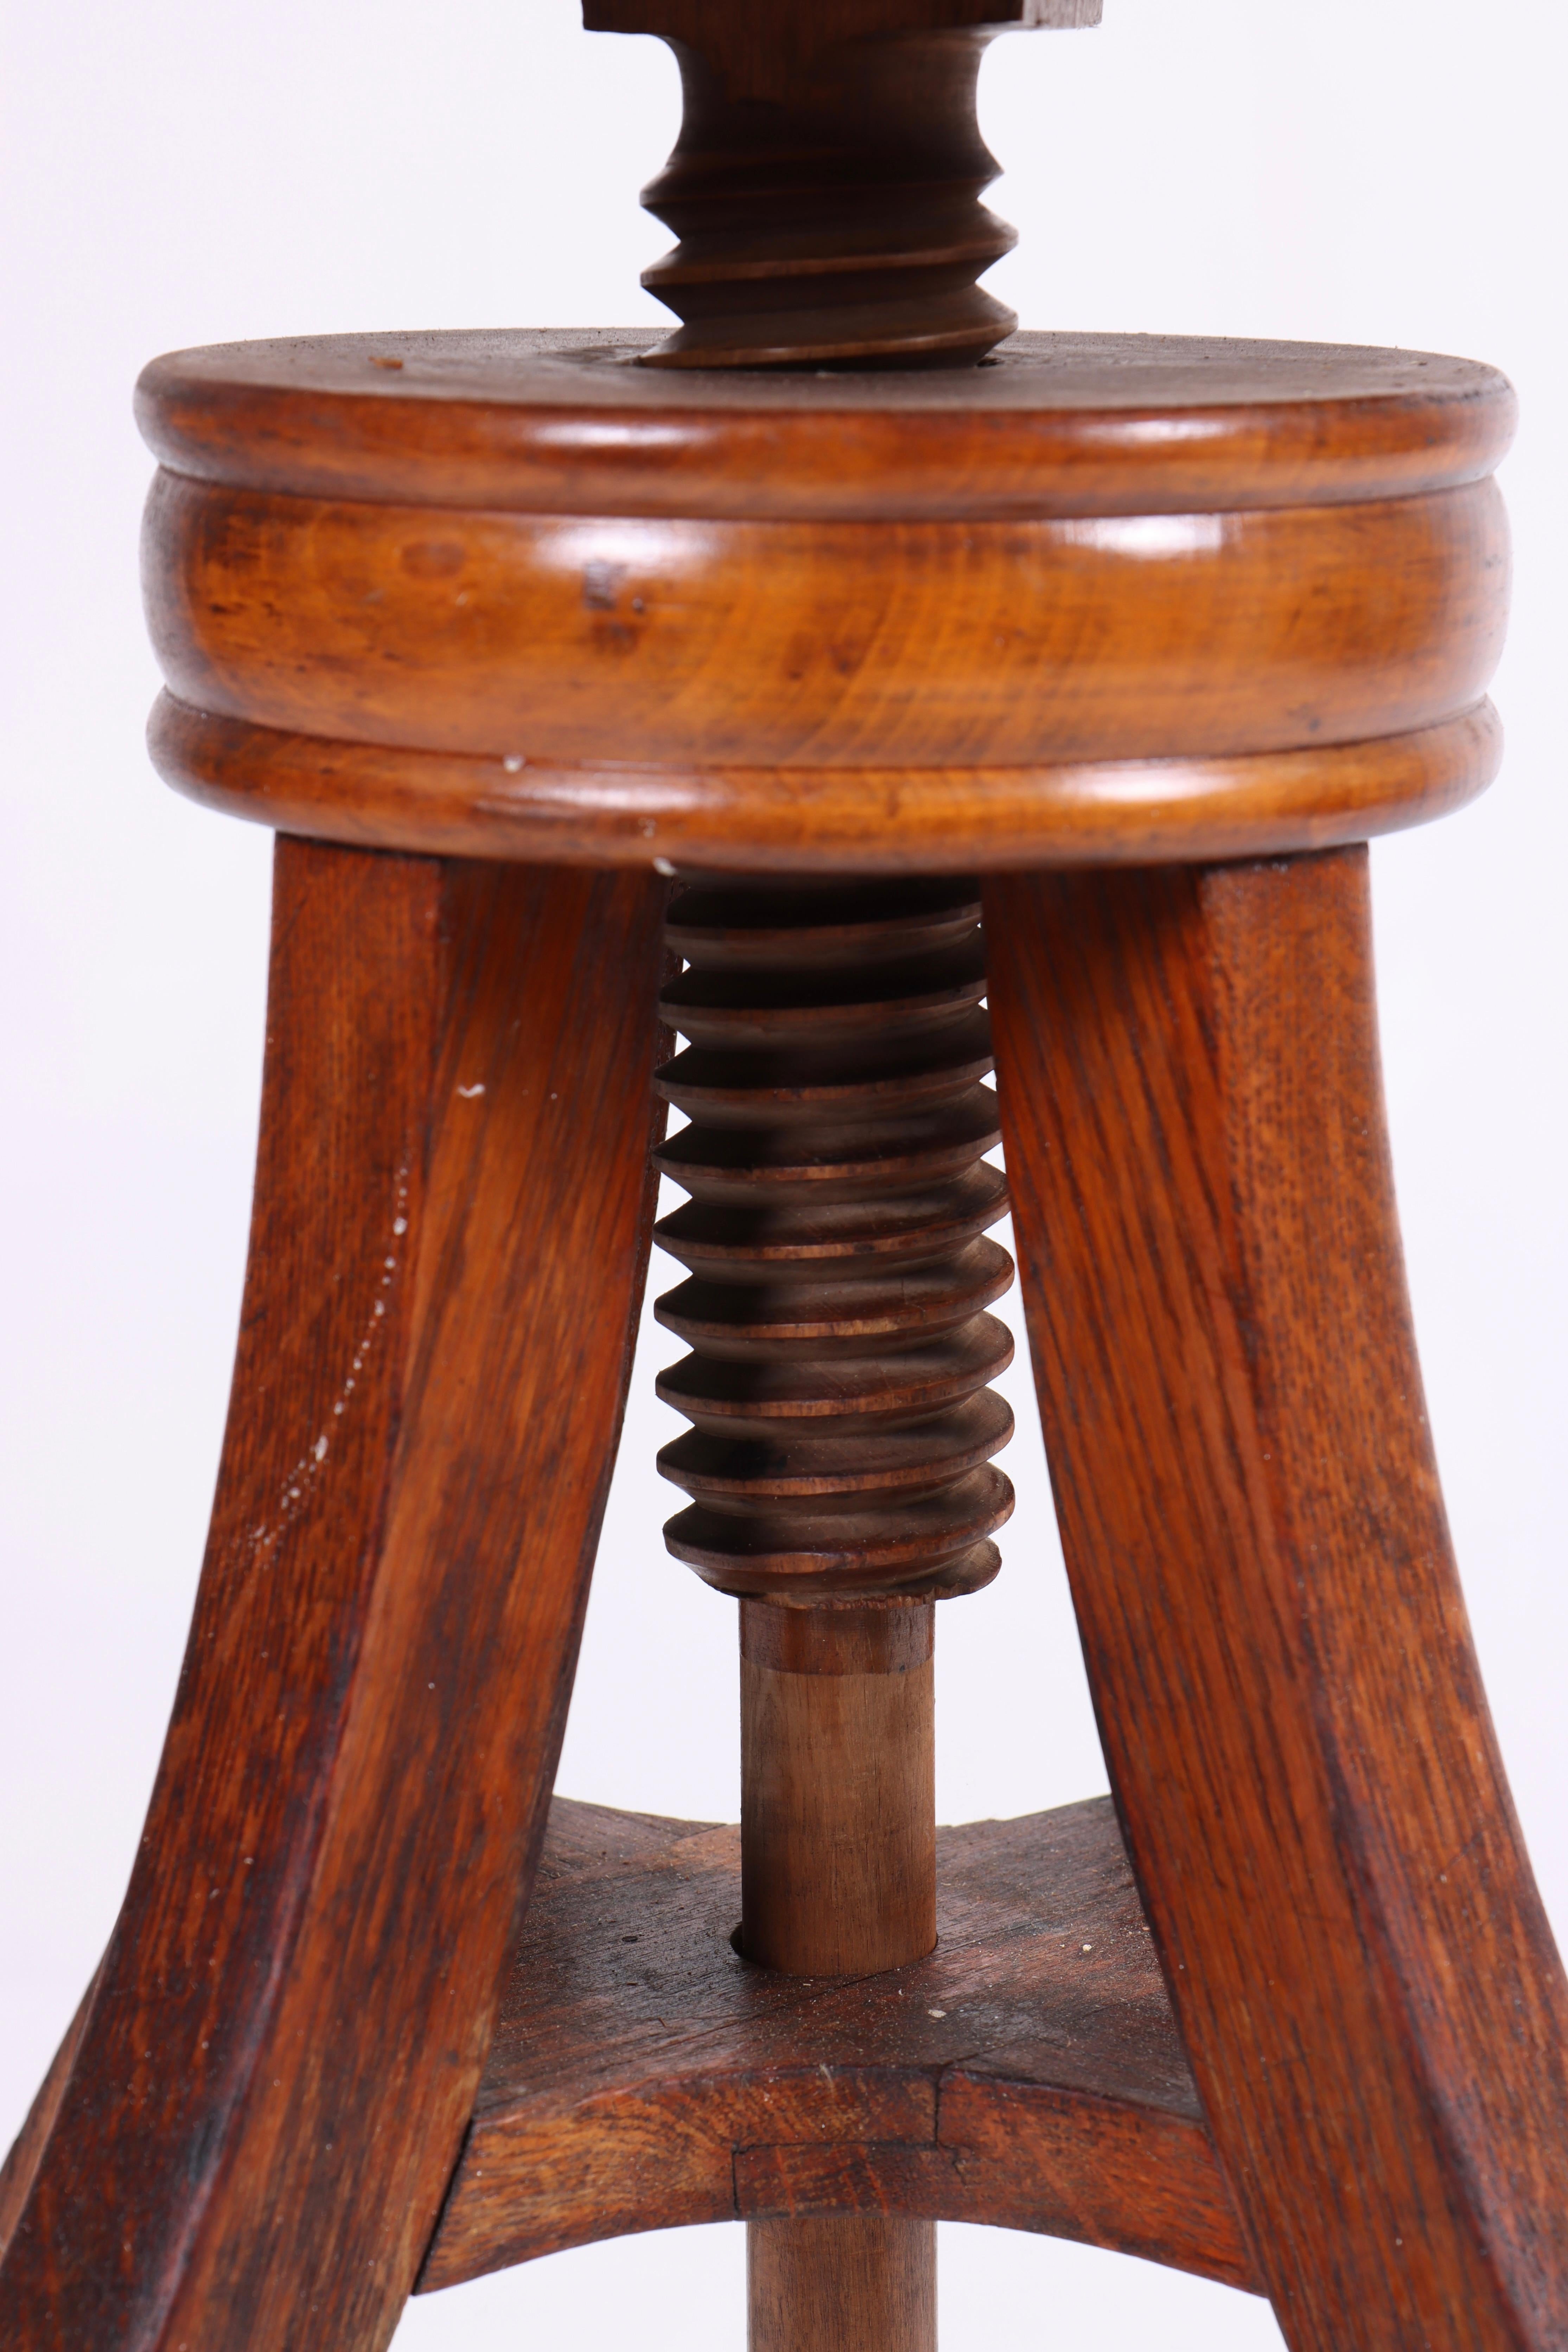 Scandinavian Modern Adjustable Artist Stool in Oak and Patinated Leather, Denmark, 1930s For Sale